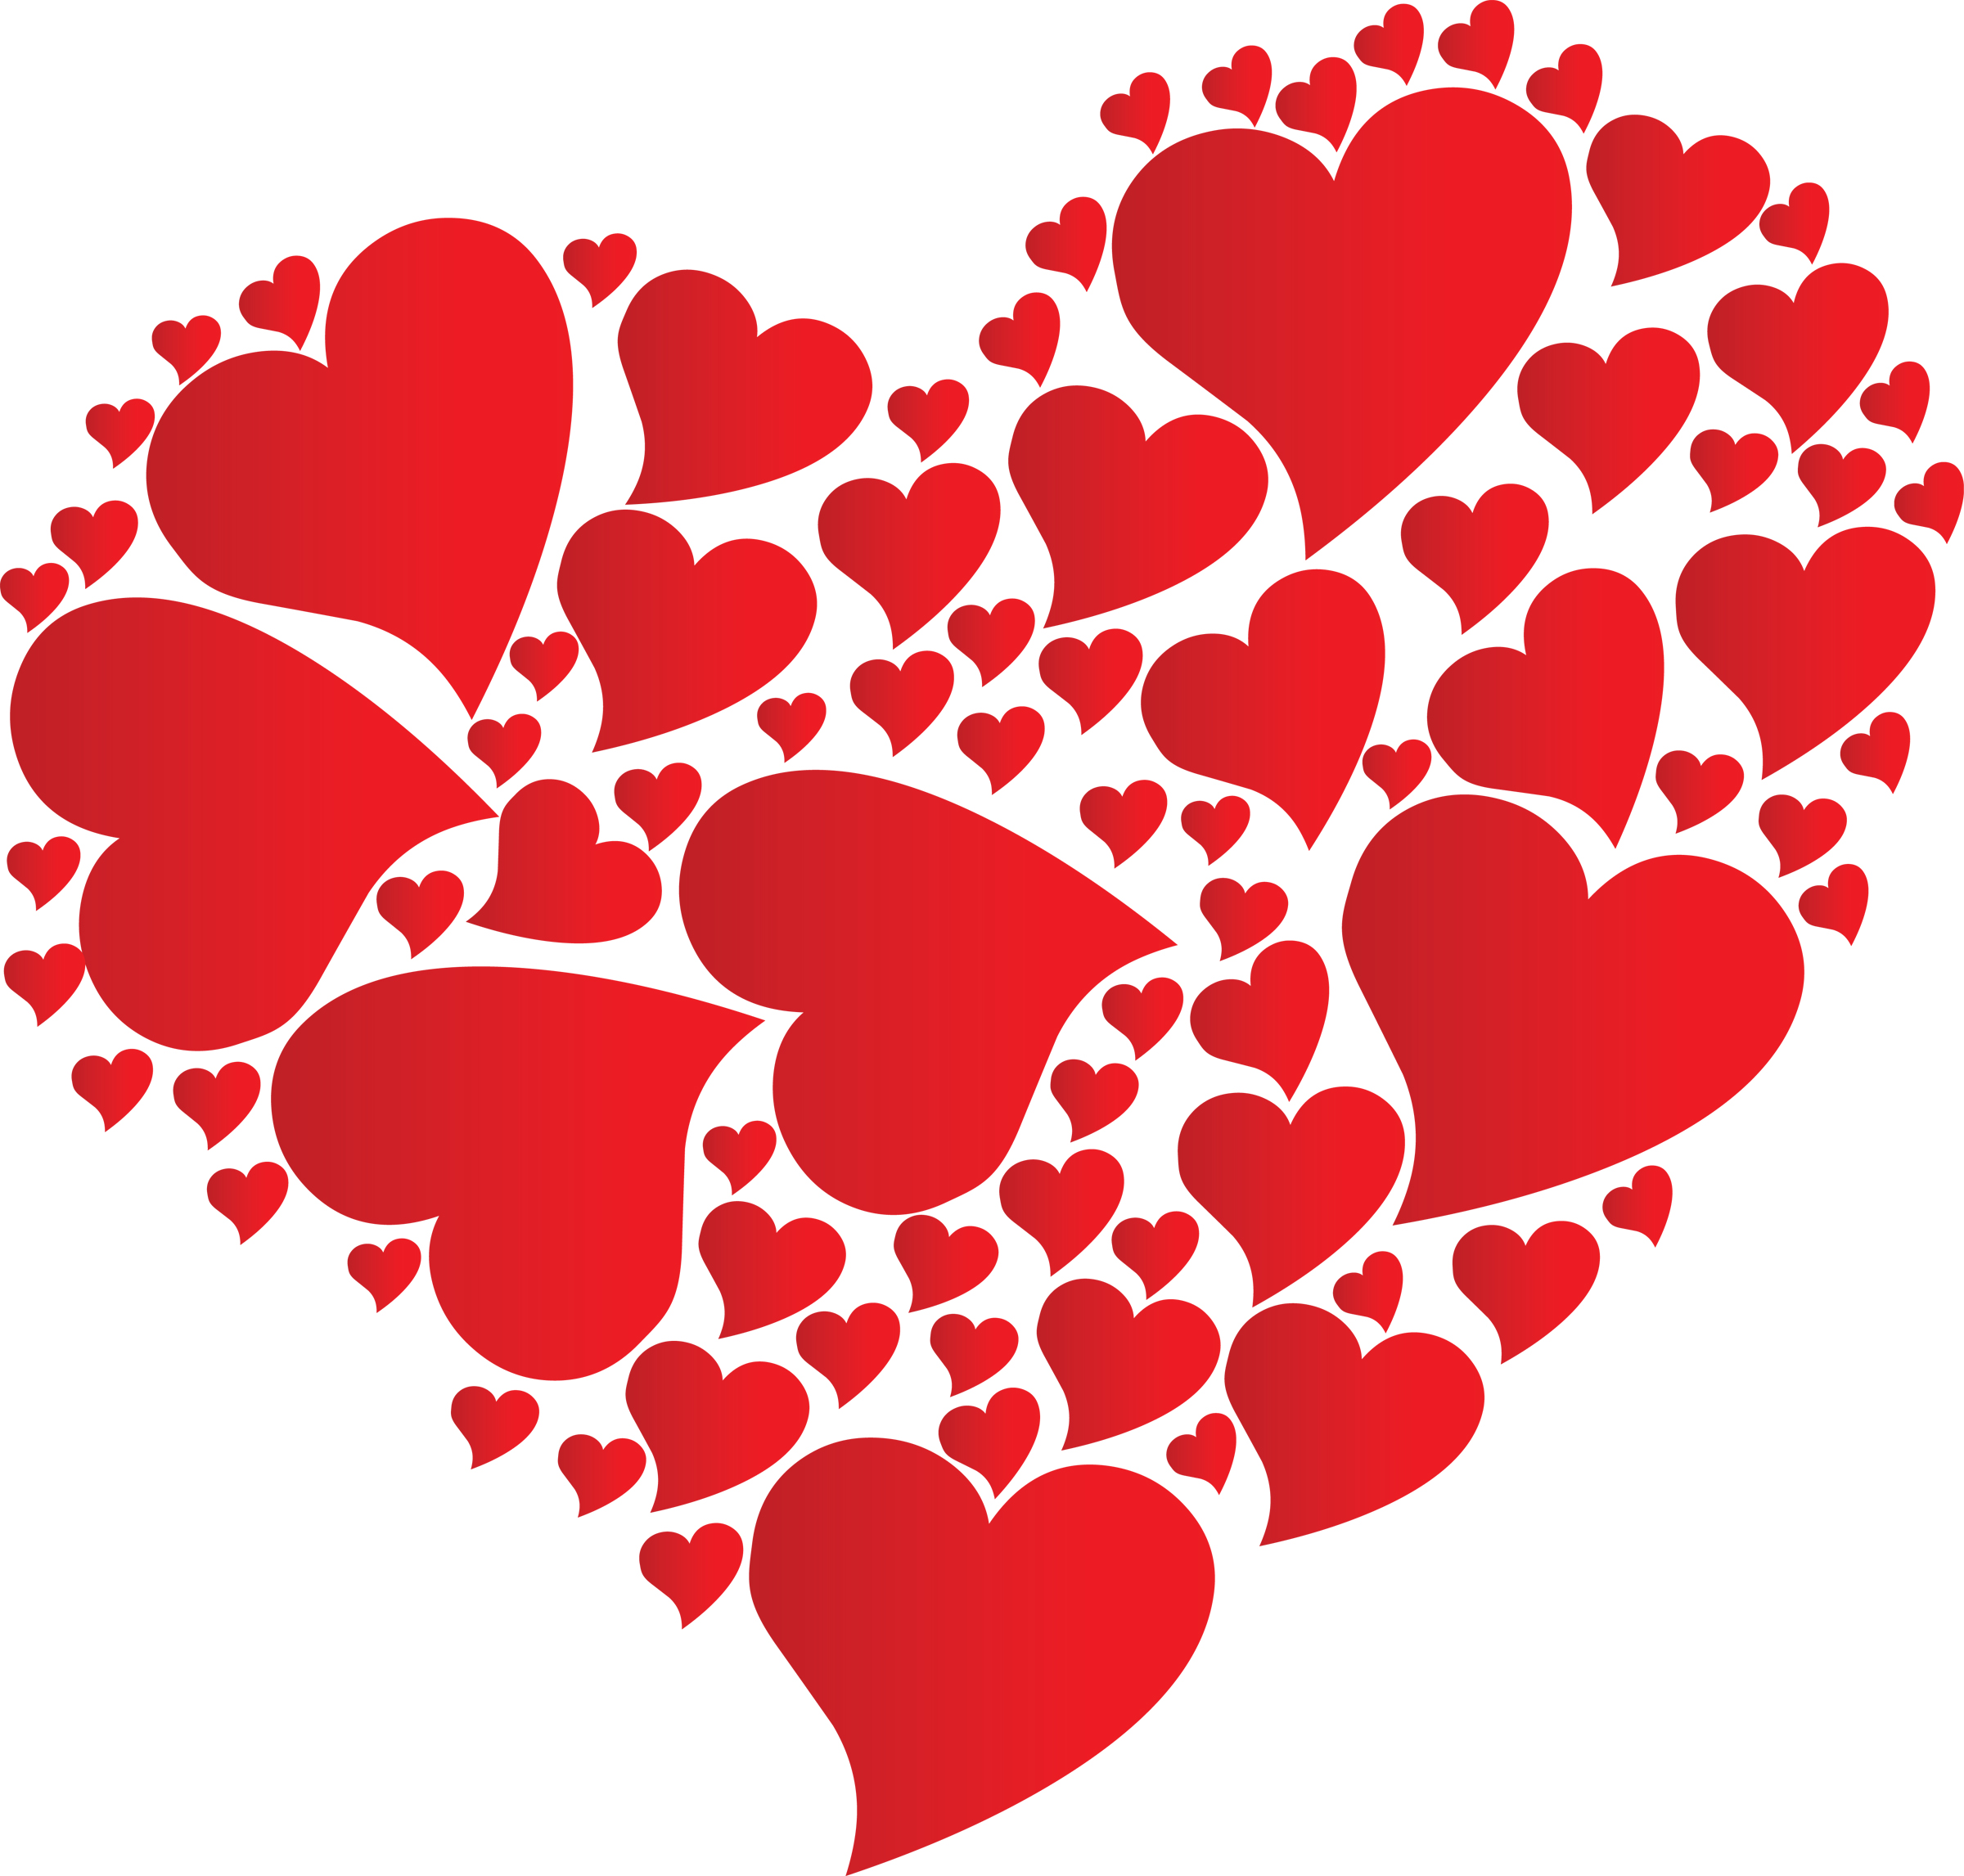 Free Hearts For Love, Download Free Hearts For Love png images, Free